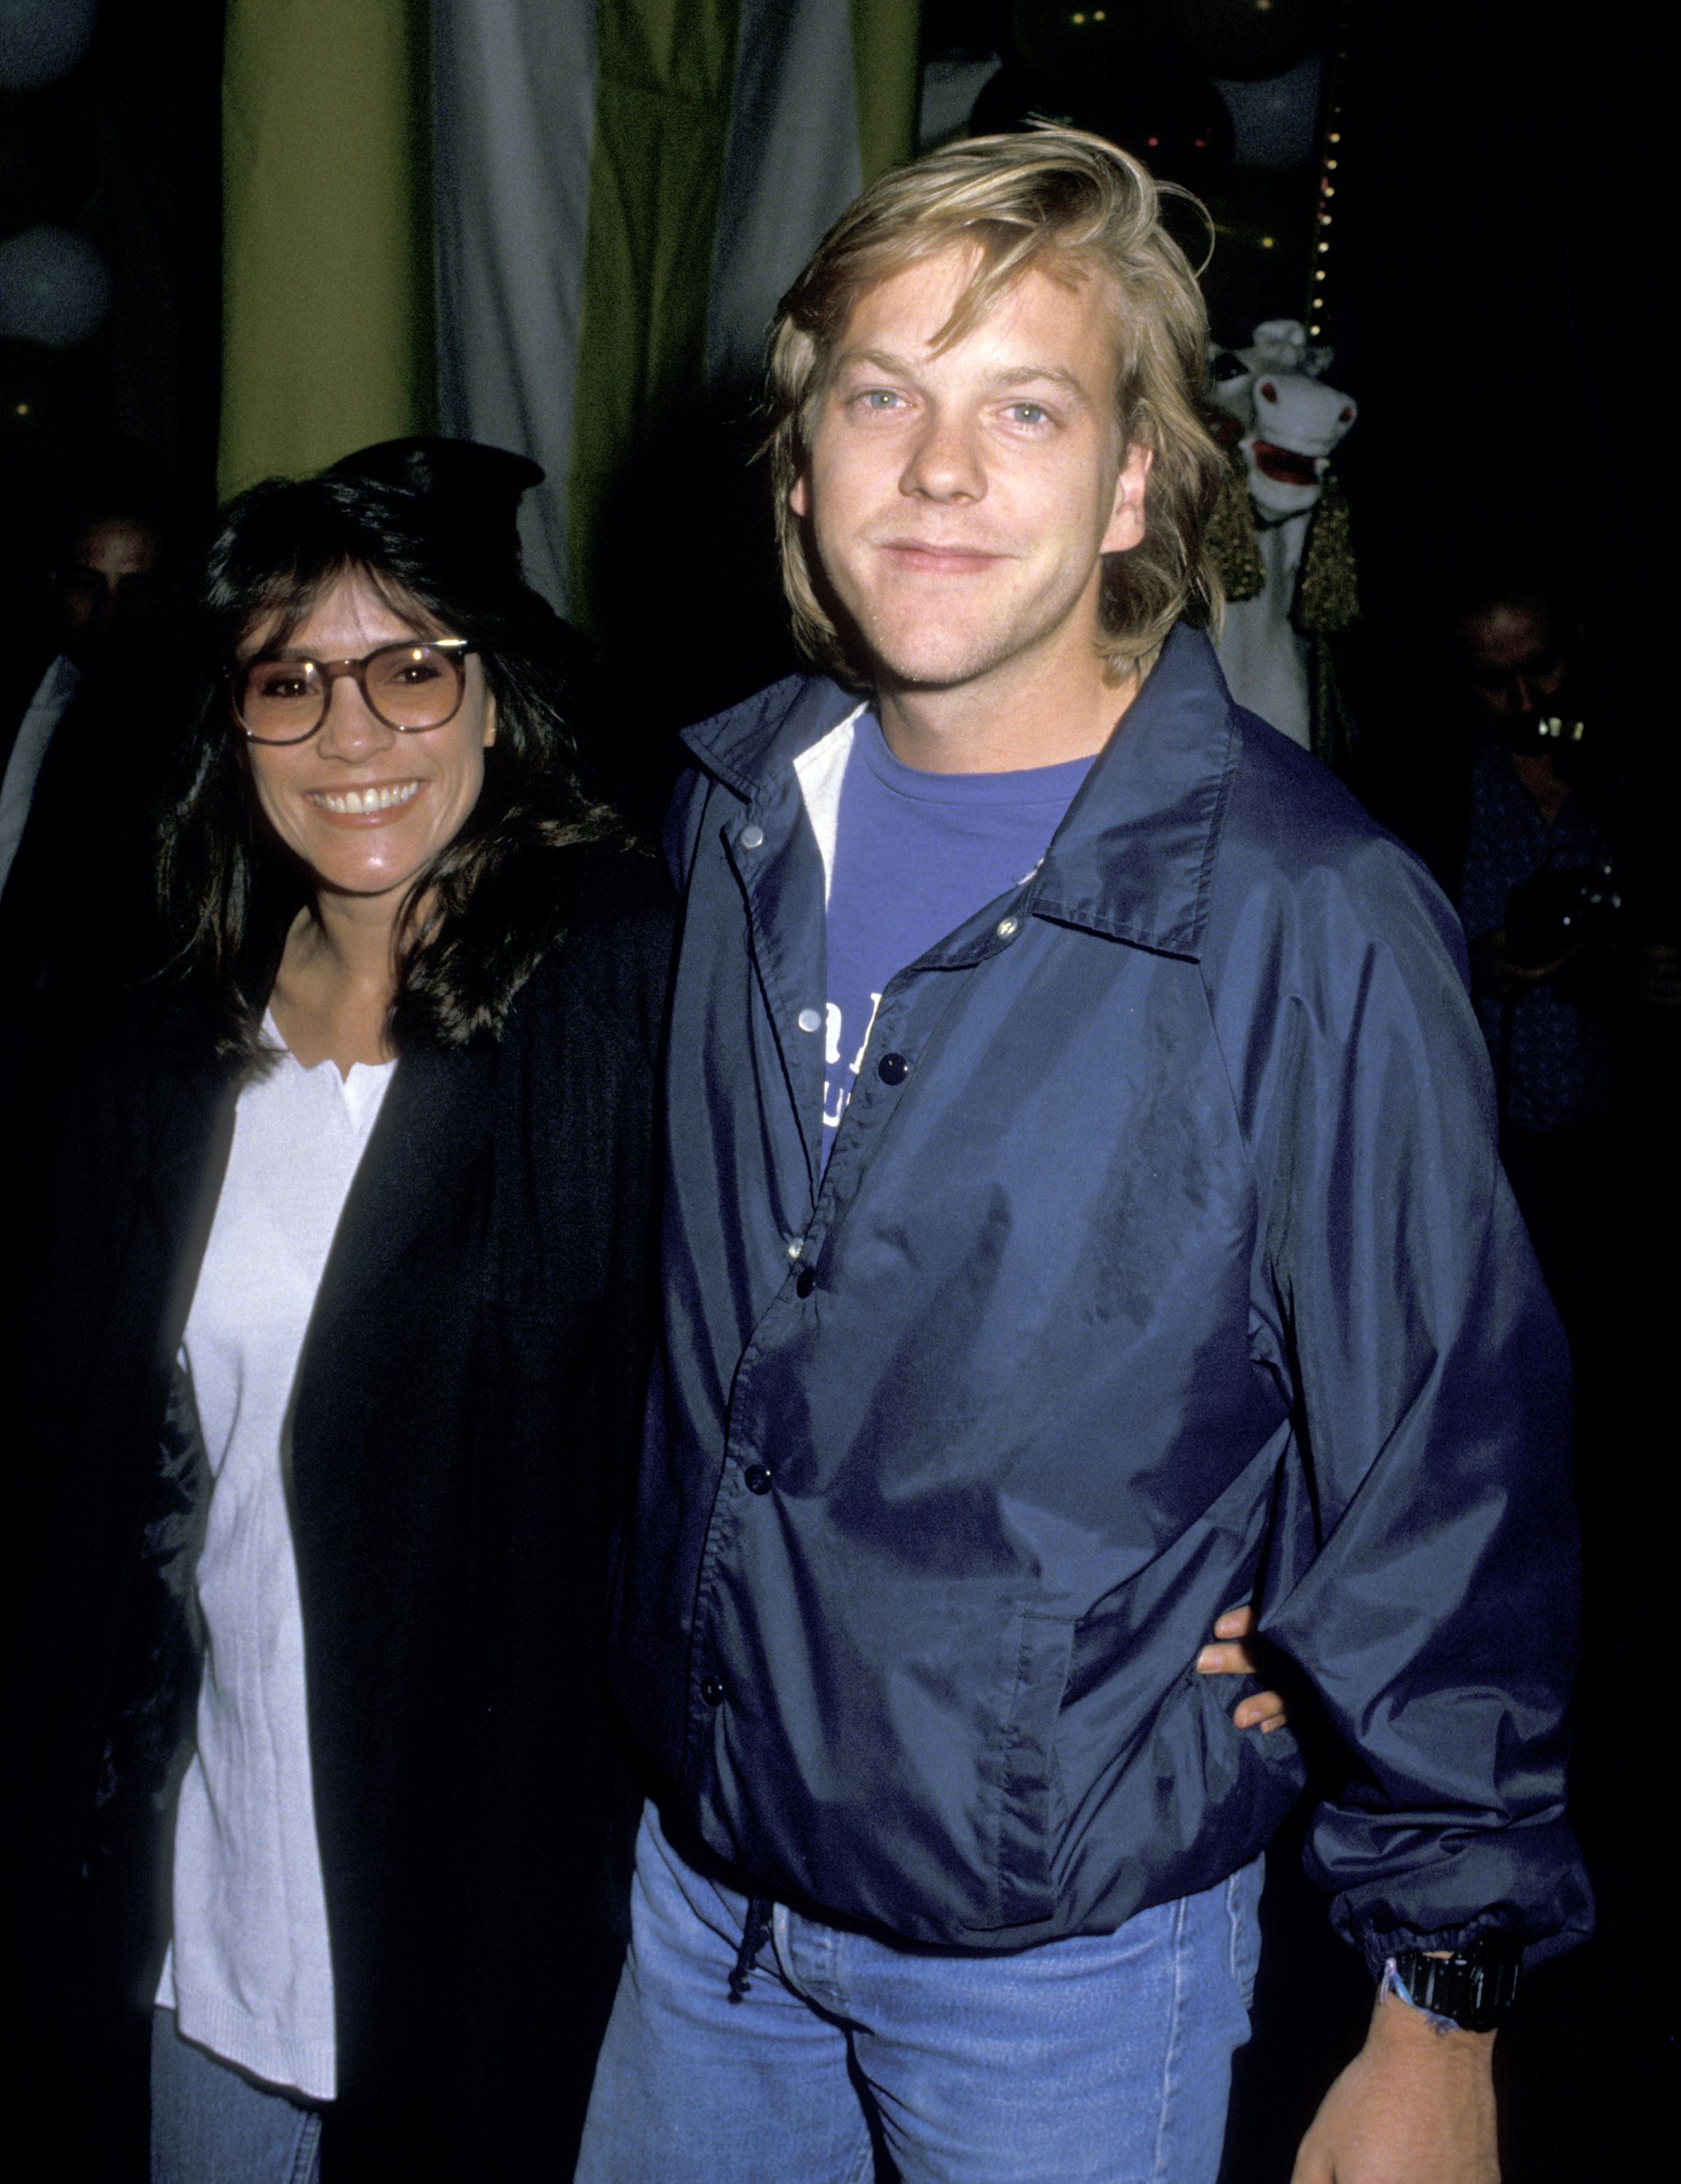 Kiefer Sutherland and Camelia Kath during the "Big" Los Angeles Premiere on May 31, 1988, at 20th Century Fox Studio in Los Angeles, California. | Source: Getty Images